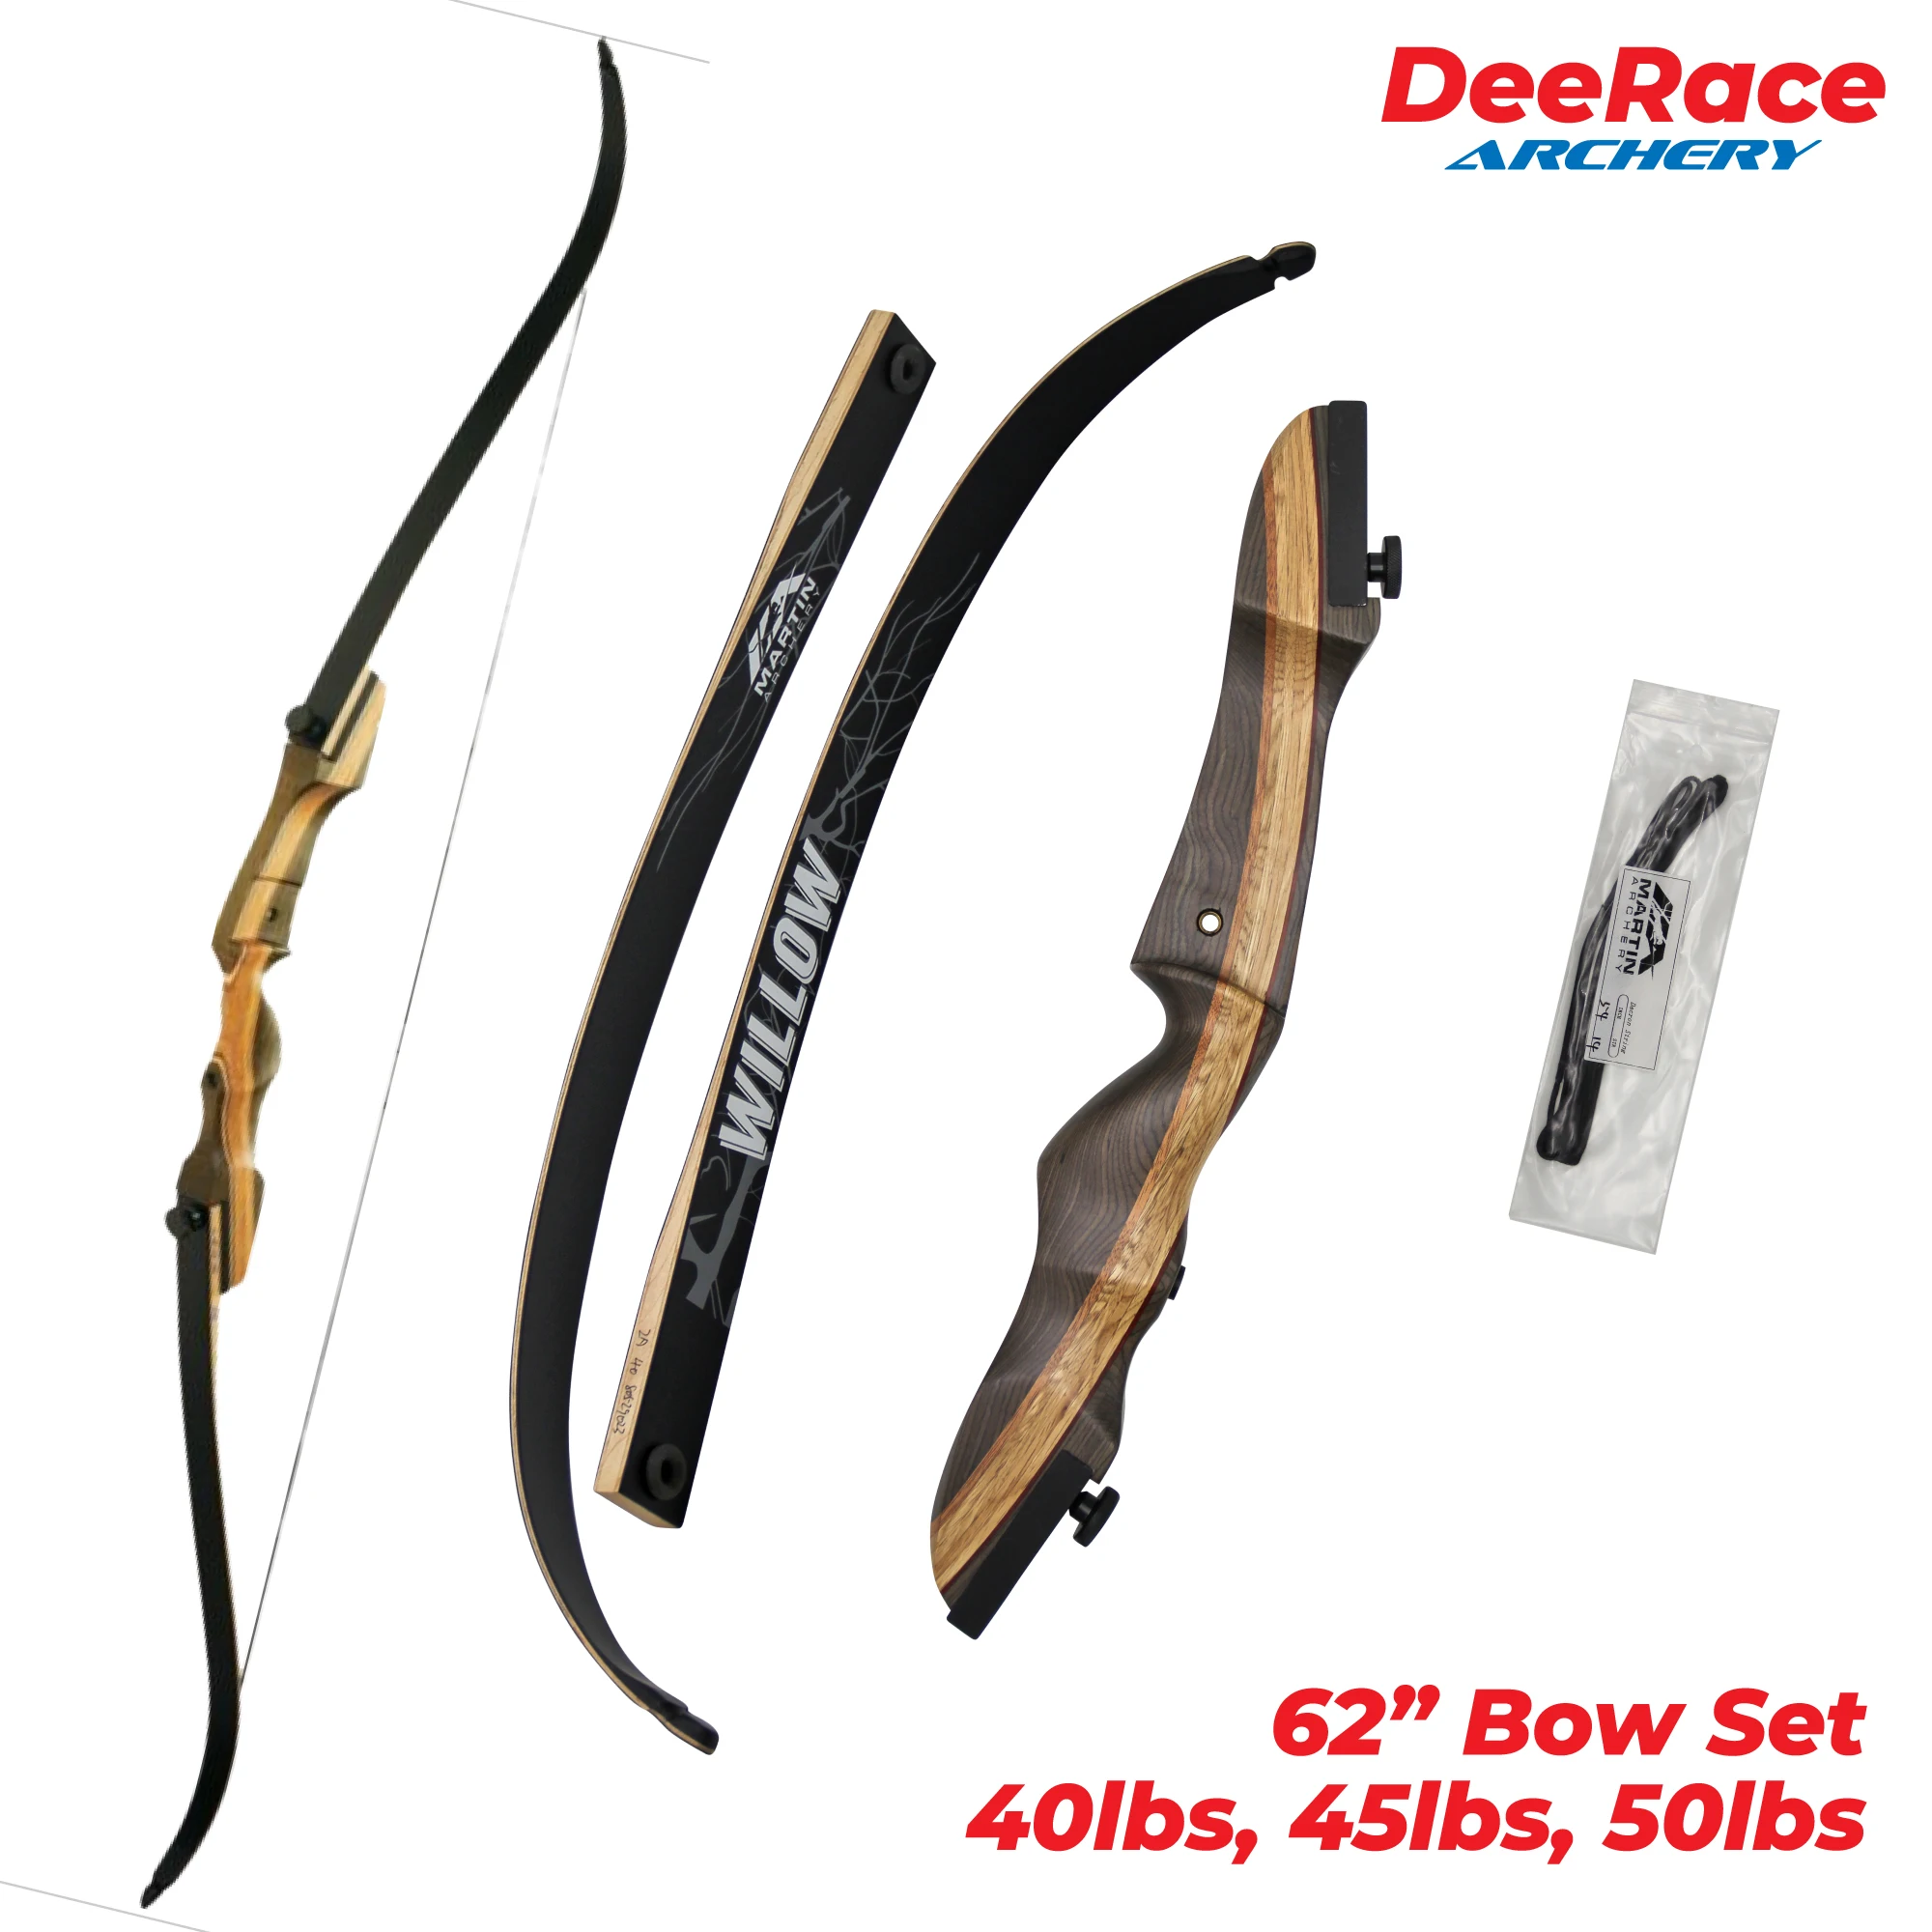 Dacron High Quality Recurve Bowstring for 62"bow 